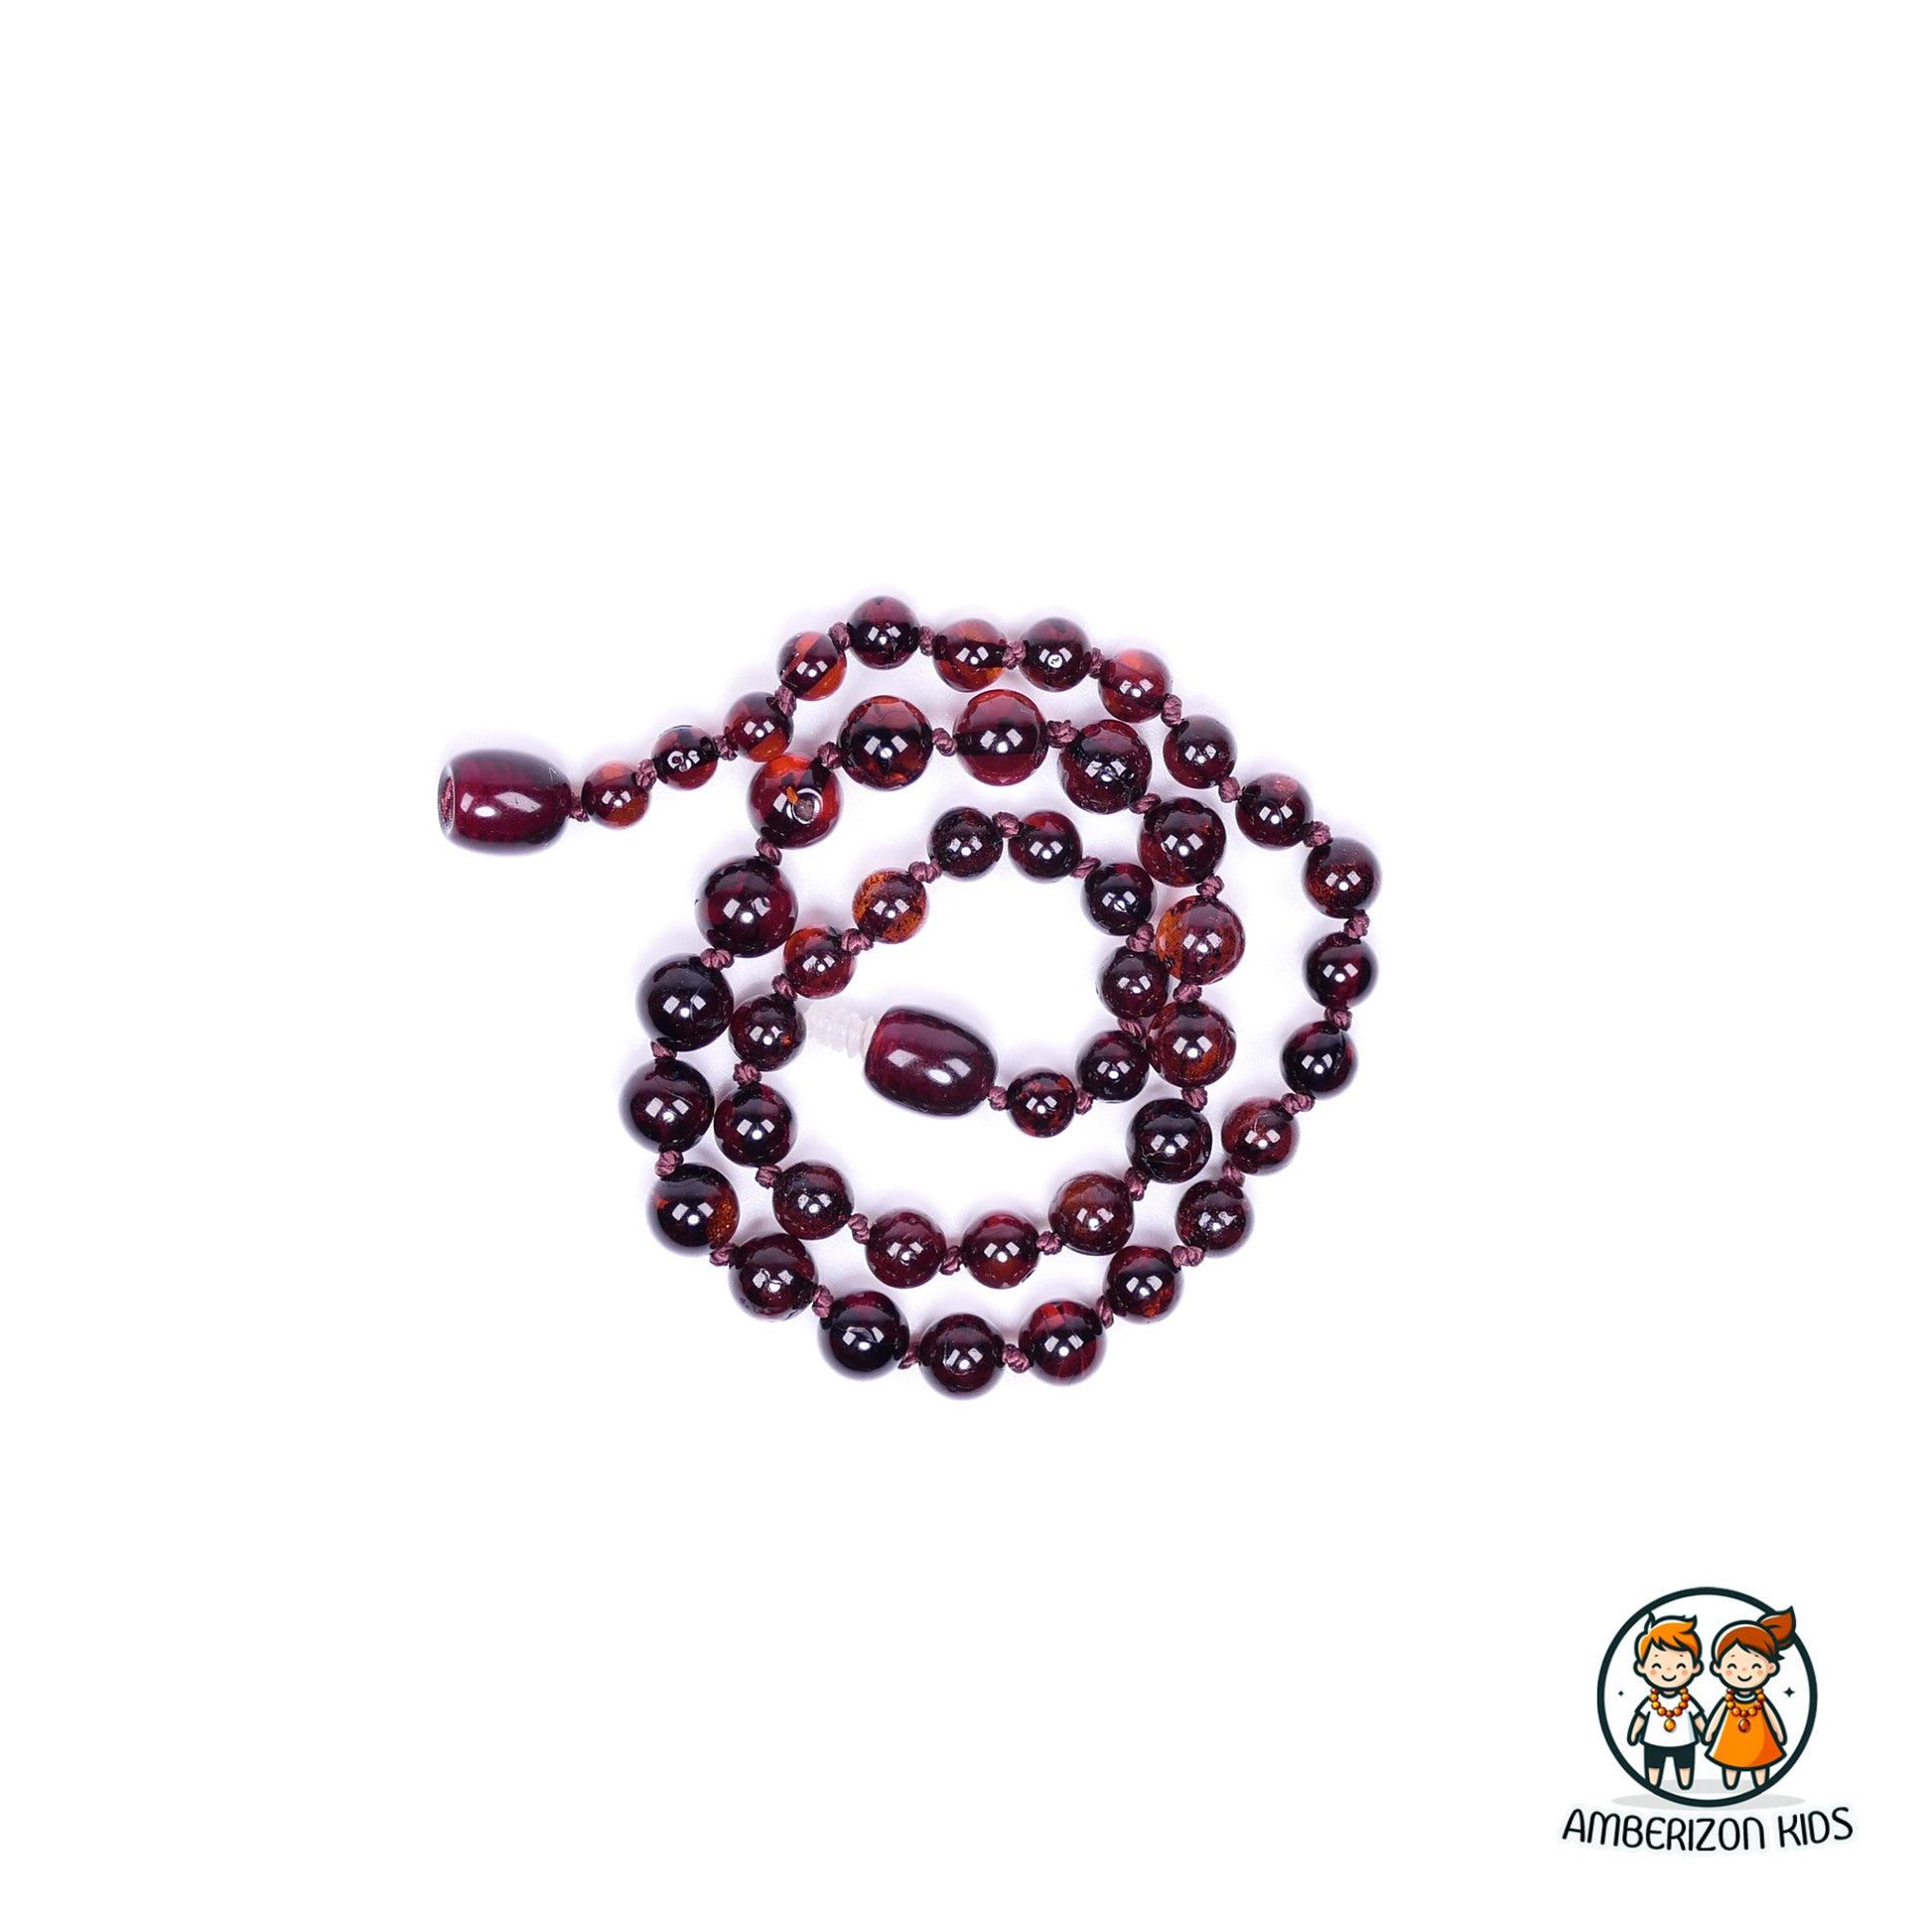 Round beads (100% round balls) Color: Cherry Diameter: graduated Ø5-6.5mm Weight: ~6.5 grams Finish: polished/glossy